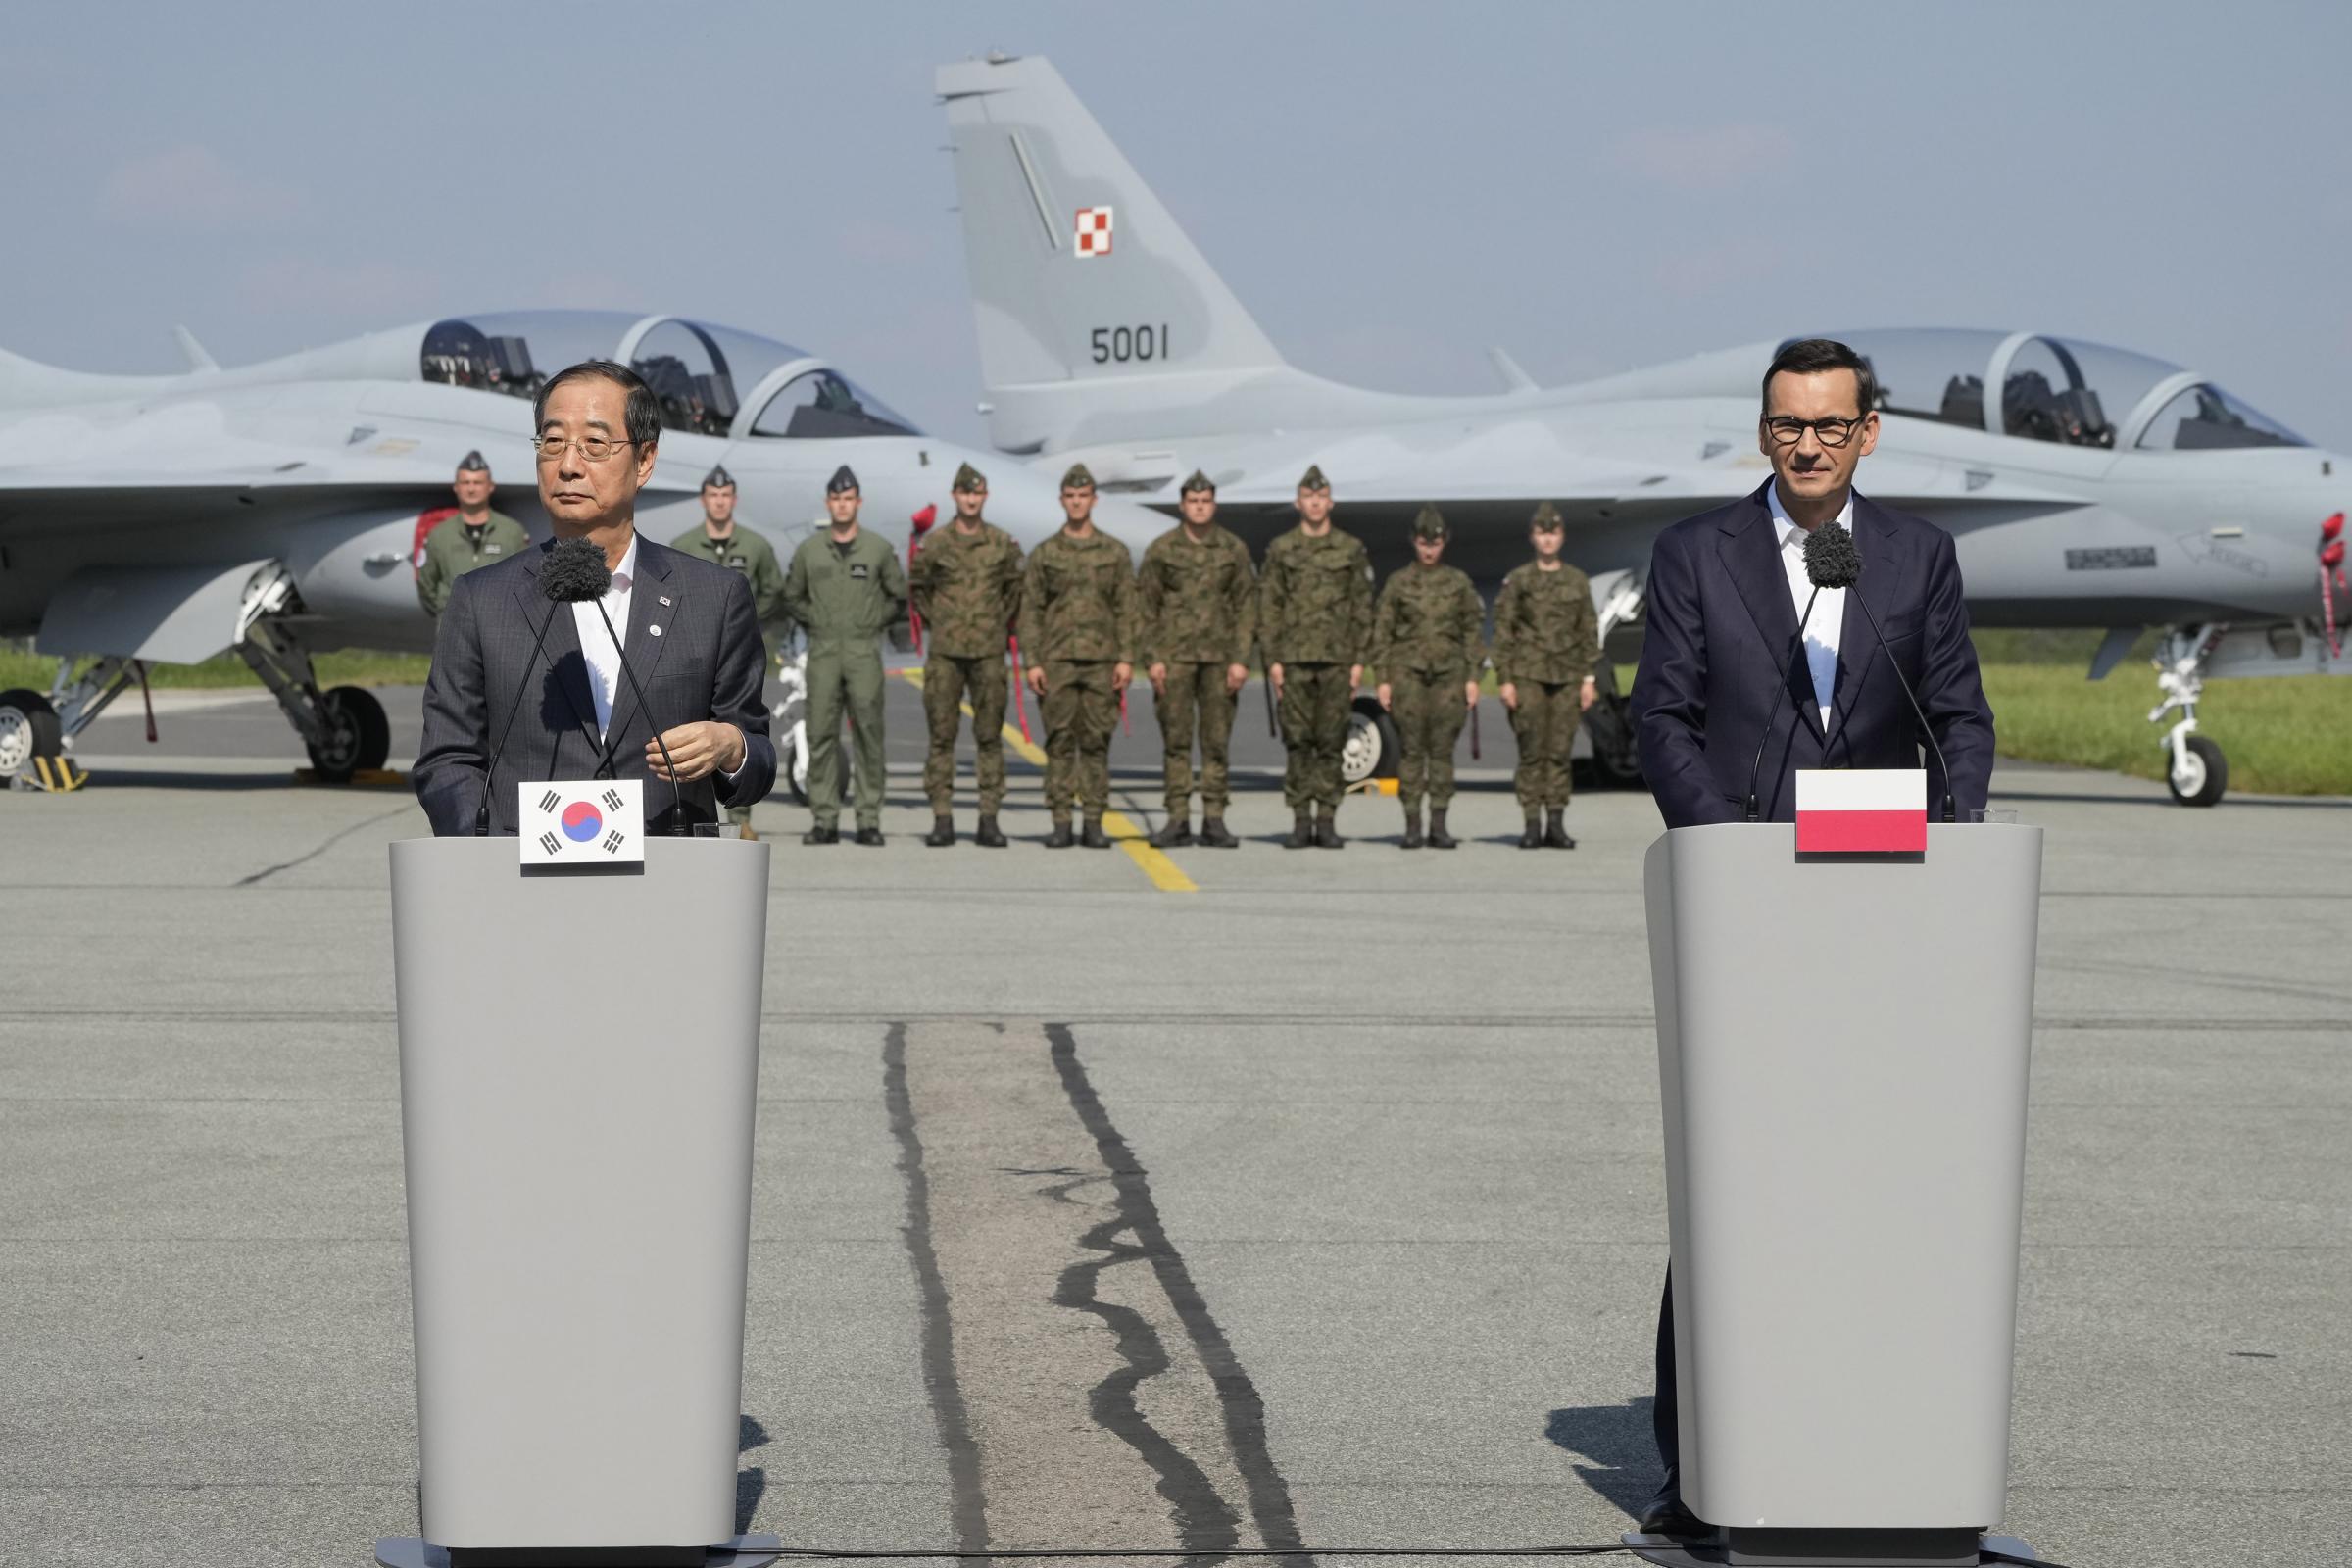 South Korean Prime Minister Han Duck-Soo, left, and his Polish host, Prime Minister Mateusz Morawiecki, right, speak to the media following talks on regional security and the examination of the FA-50 fighter jets that Poland recently bought from South